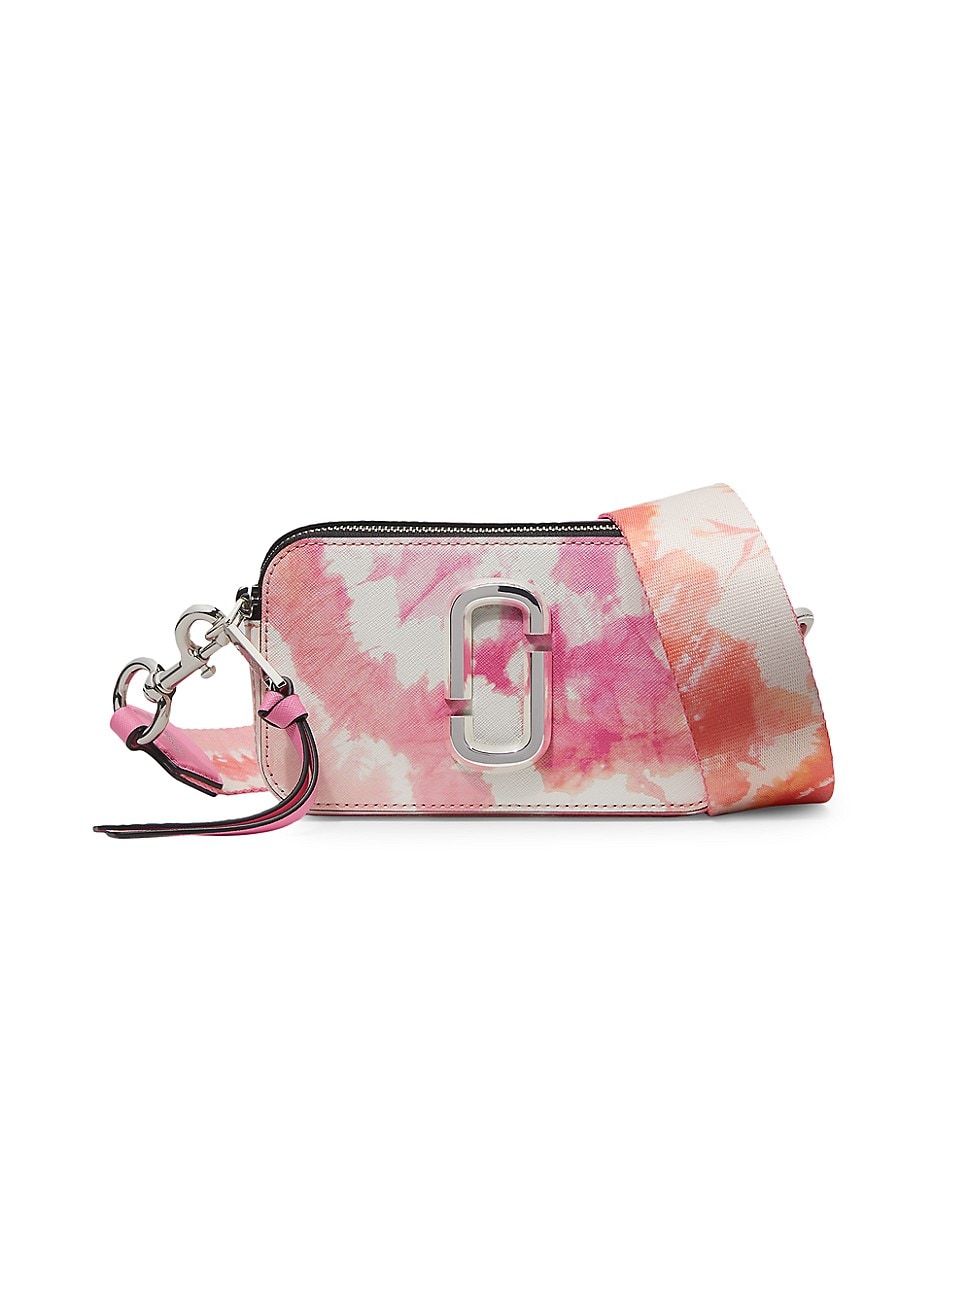 Women's The Snapshot Tie-Dye Coated Leather Camera Bag - Pink Multi - Pink Multi | Saks Fifth Avenue